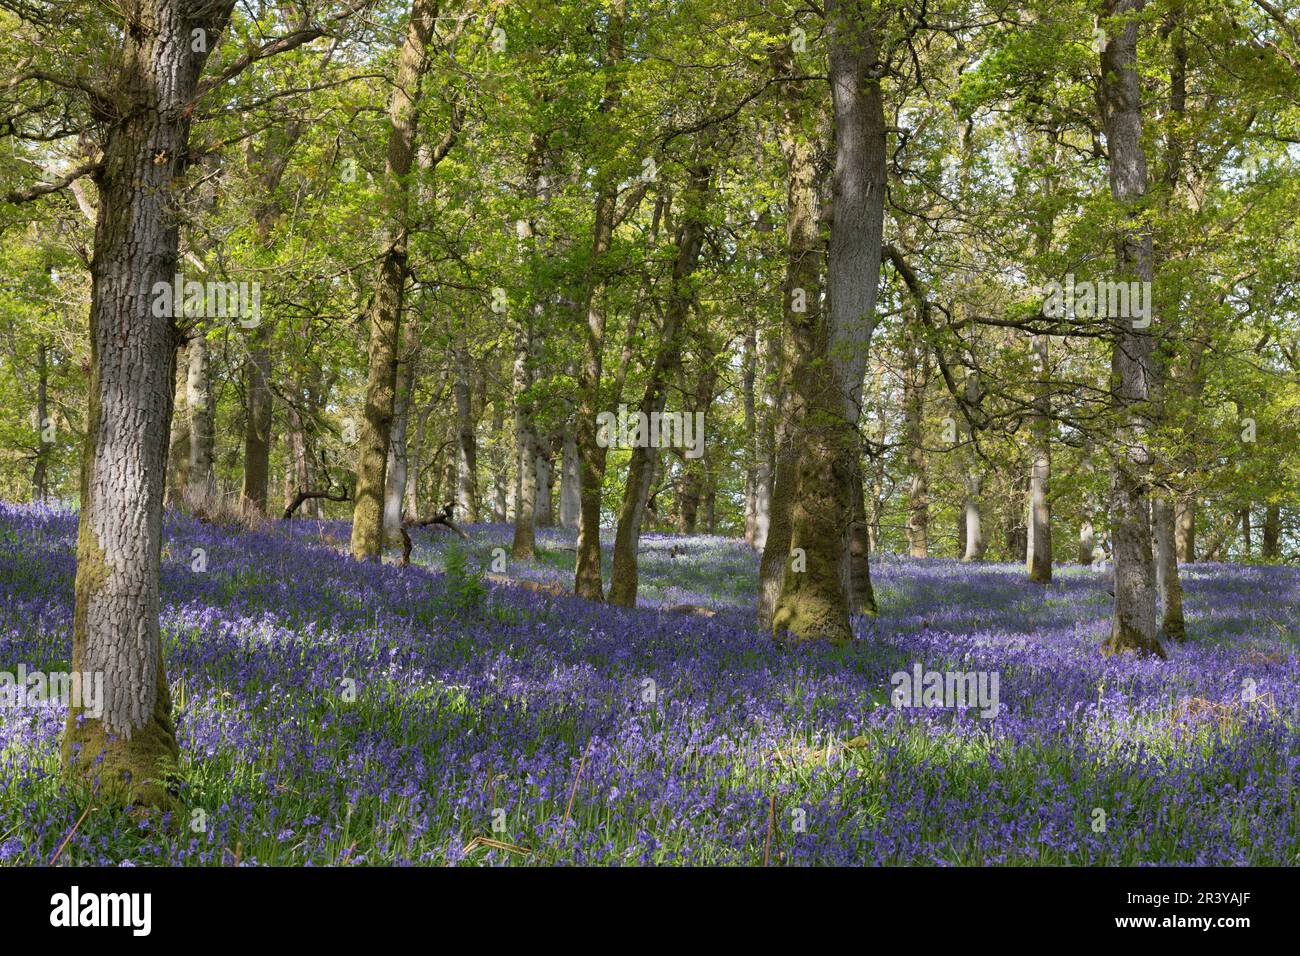 The Woodland Floor Carpeted with Native Bluebells (Hyacinthoides Non-scripta) in Flower in Kinclaven Bluebell Wood, Perthshire, in Spring Sunshine Stock Photo